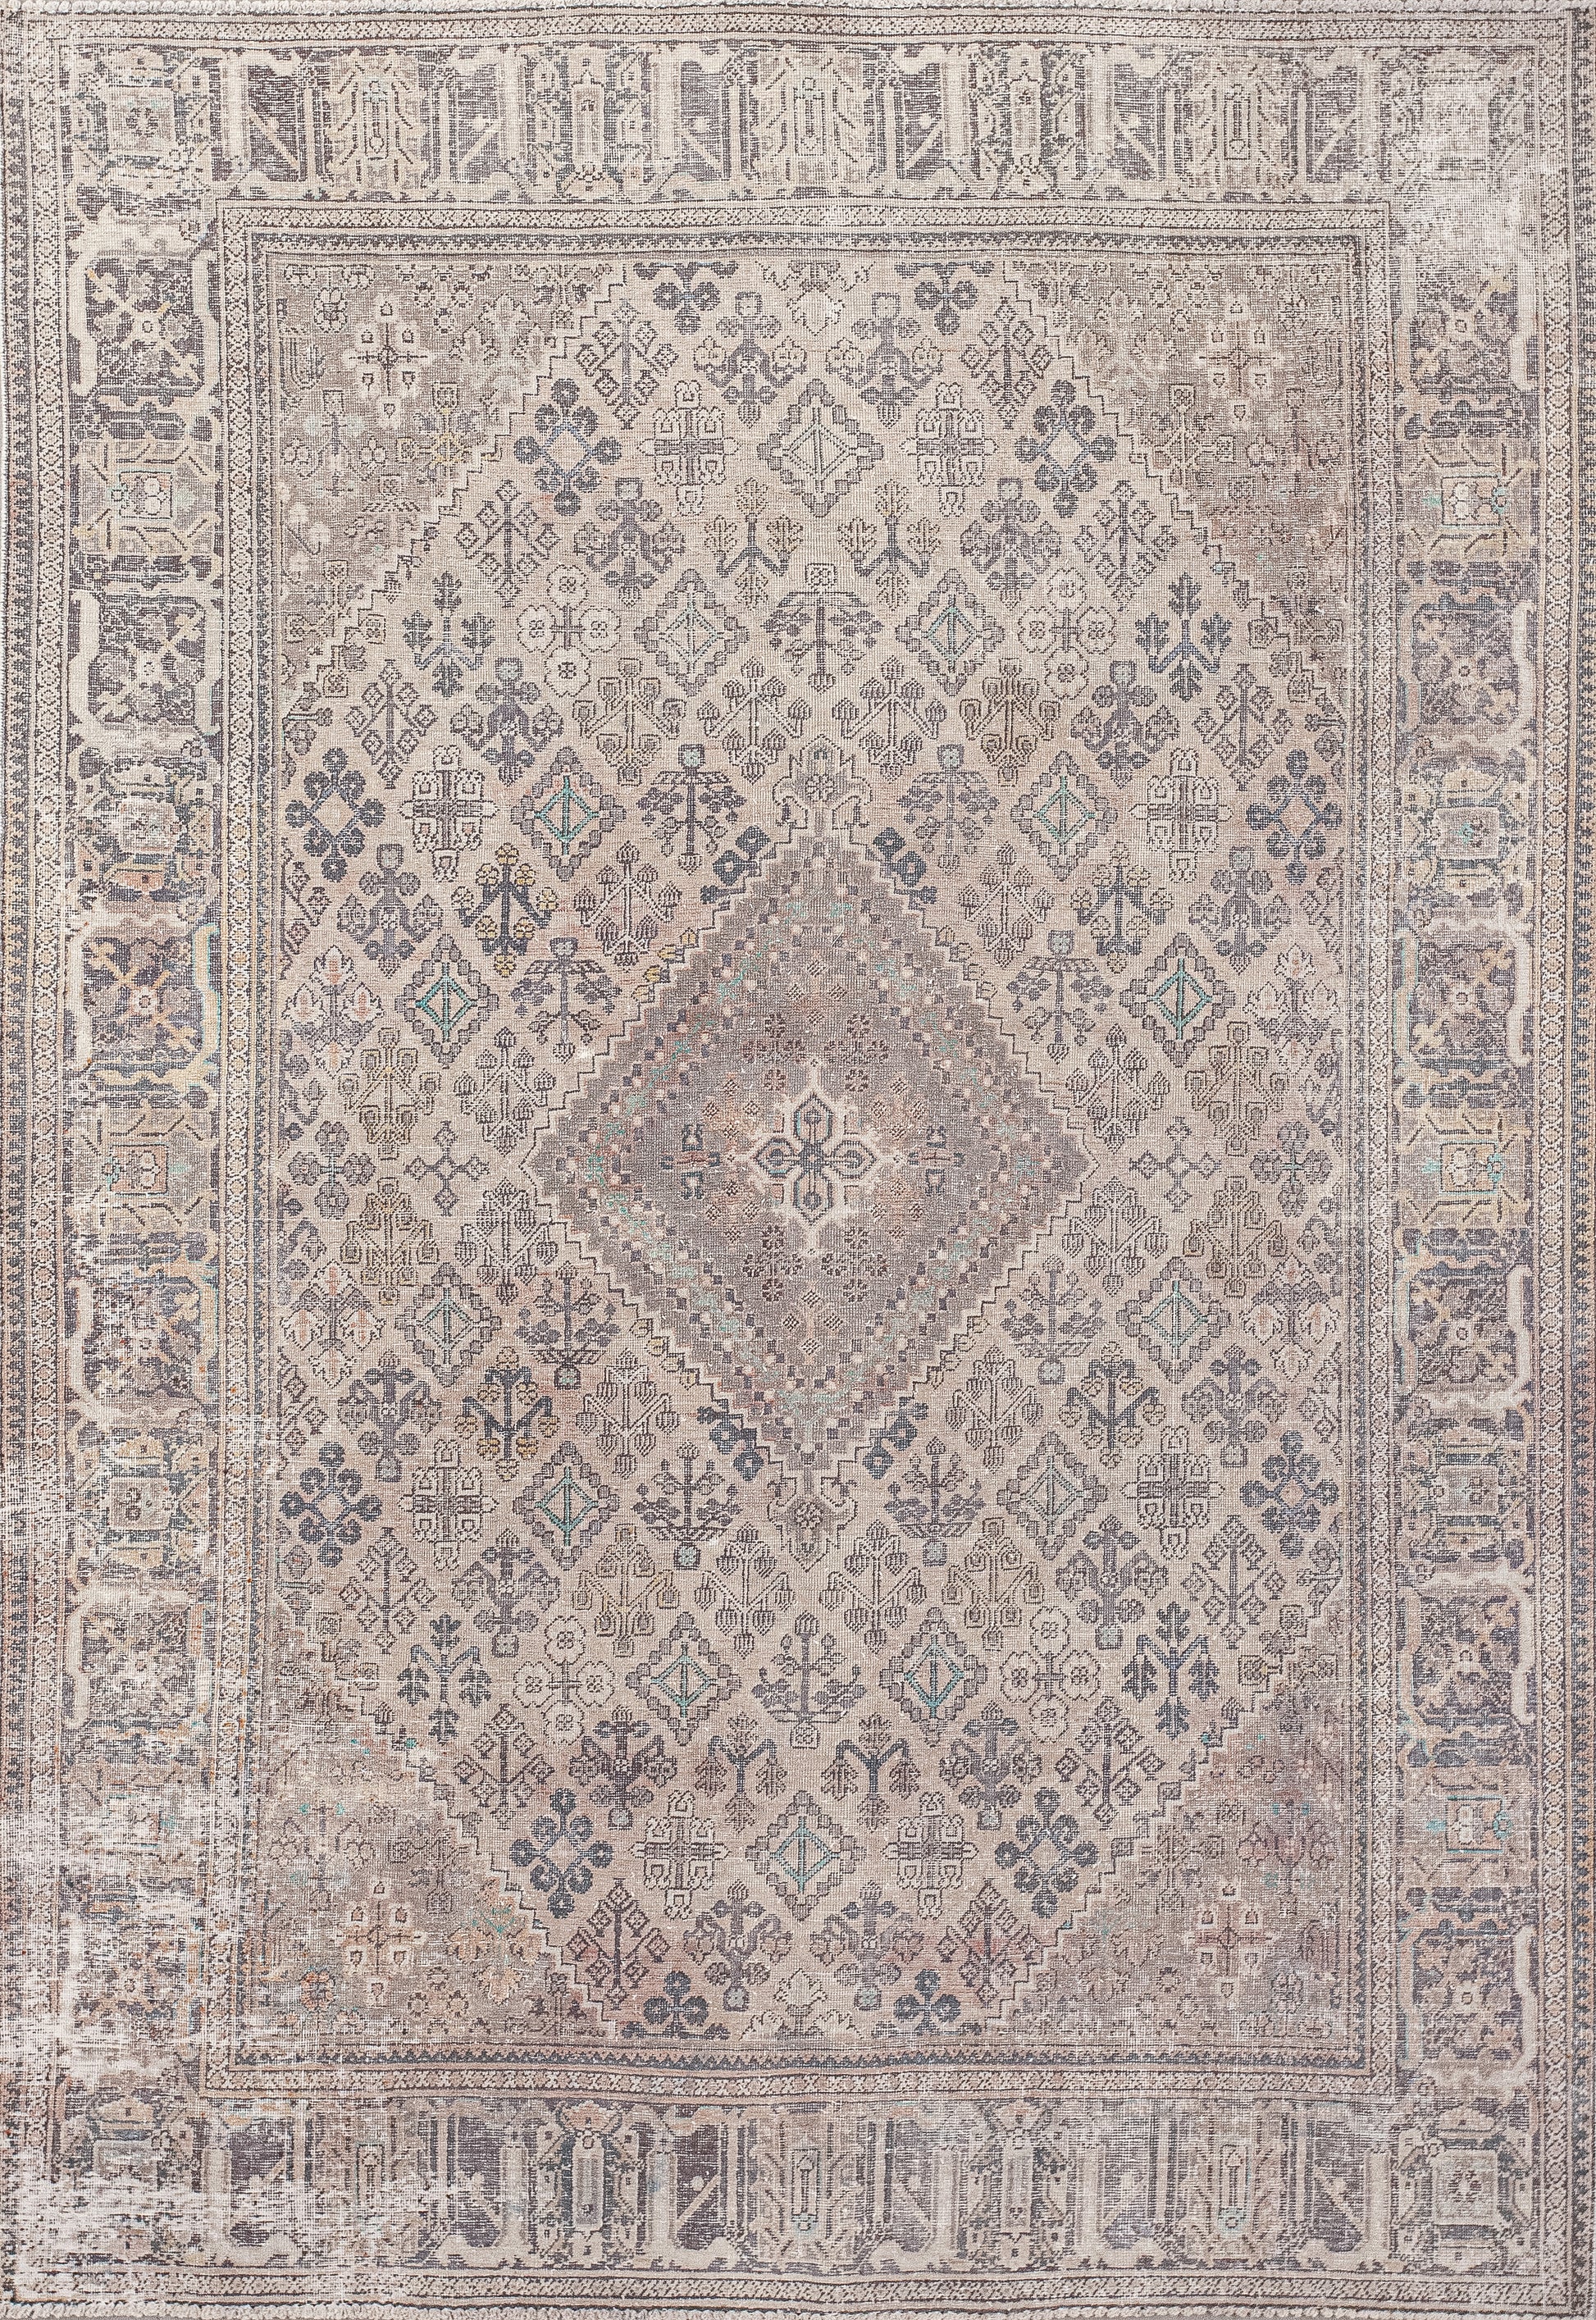 This luxurious rug comes with the richness of history and honor. The muted color palette has gold, beige, strong gray, and highlights in green. 